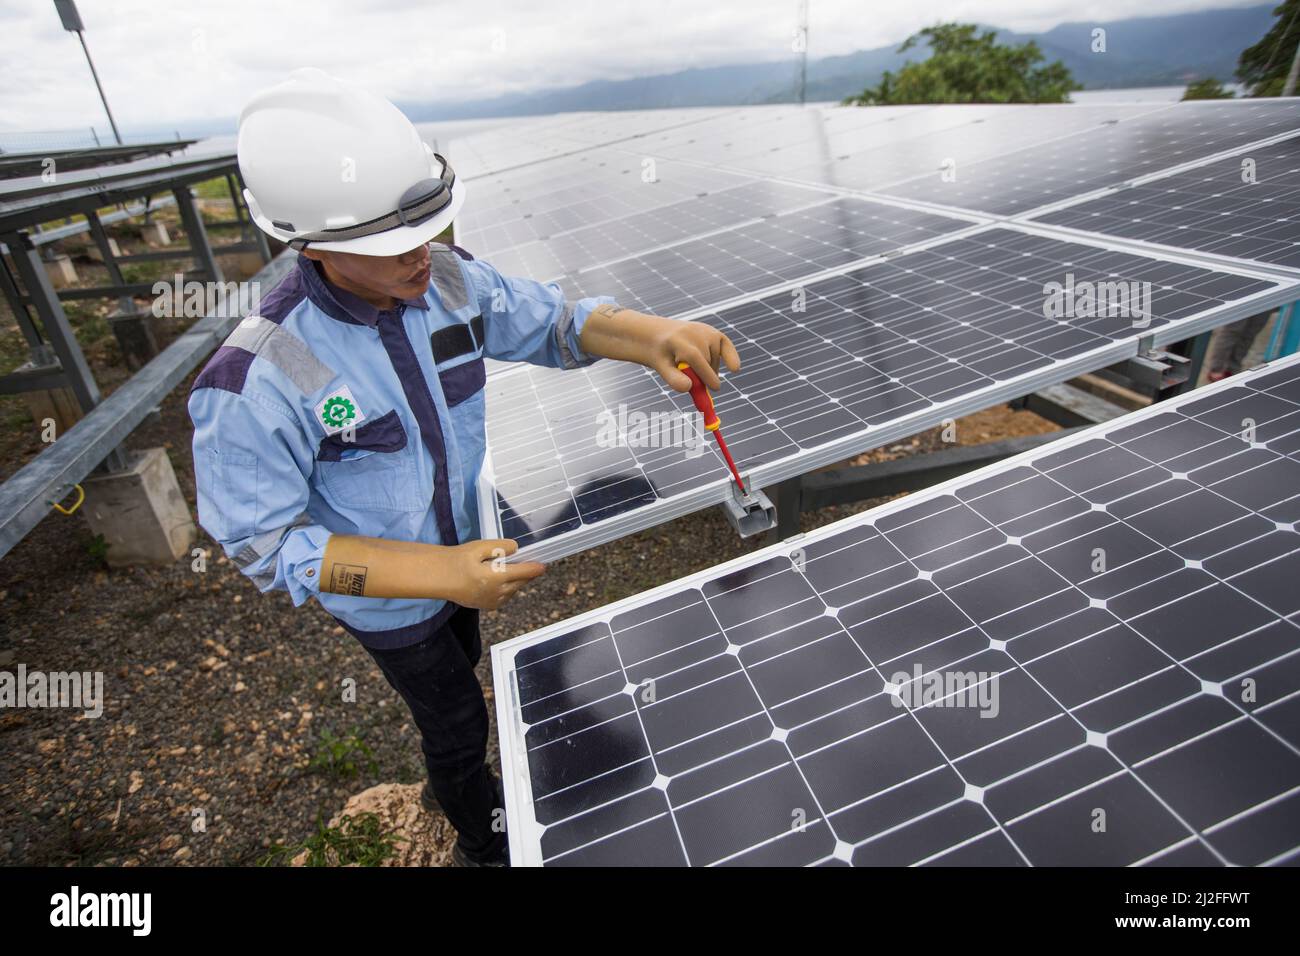 Junior electrical technician, Aldi (25), inspects and maintains solar panels on Karampuang Island, Indonesia, which were installed as part of the Gree Stock Photo